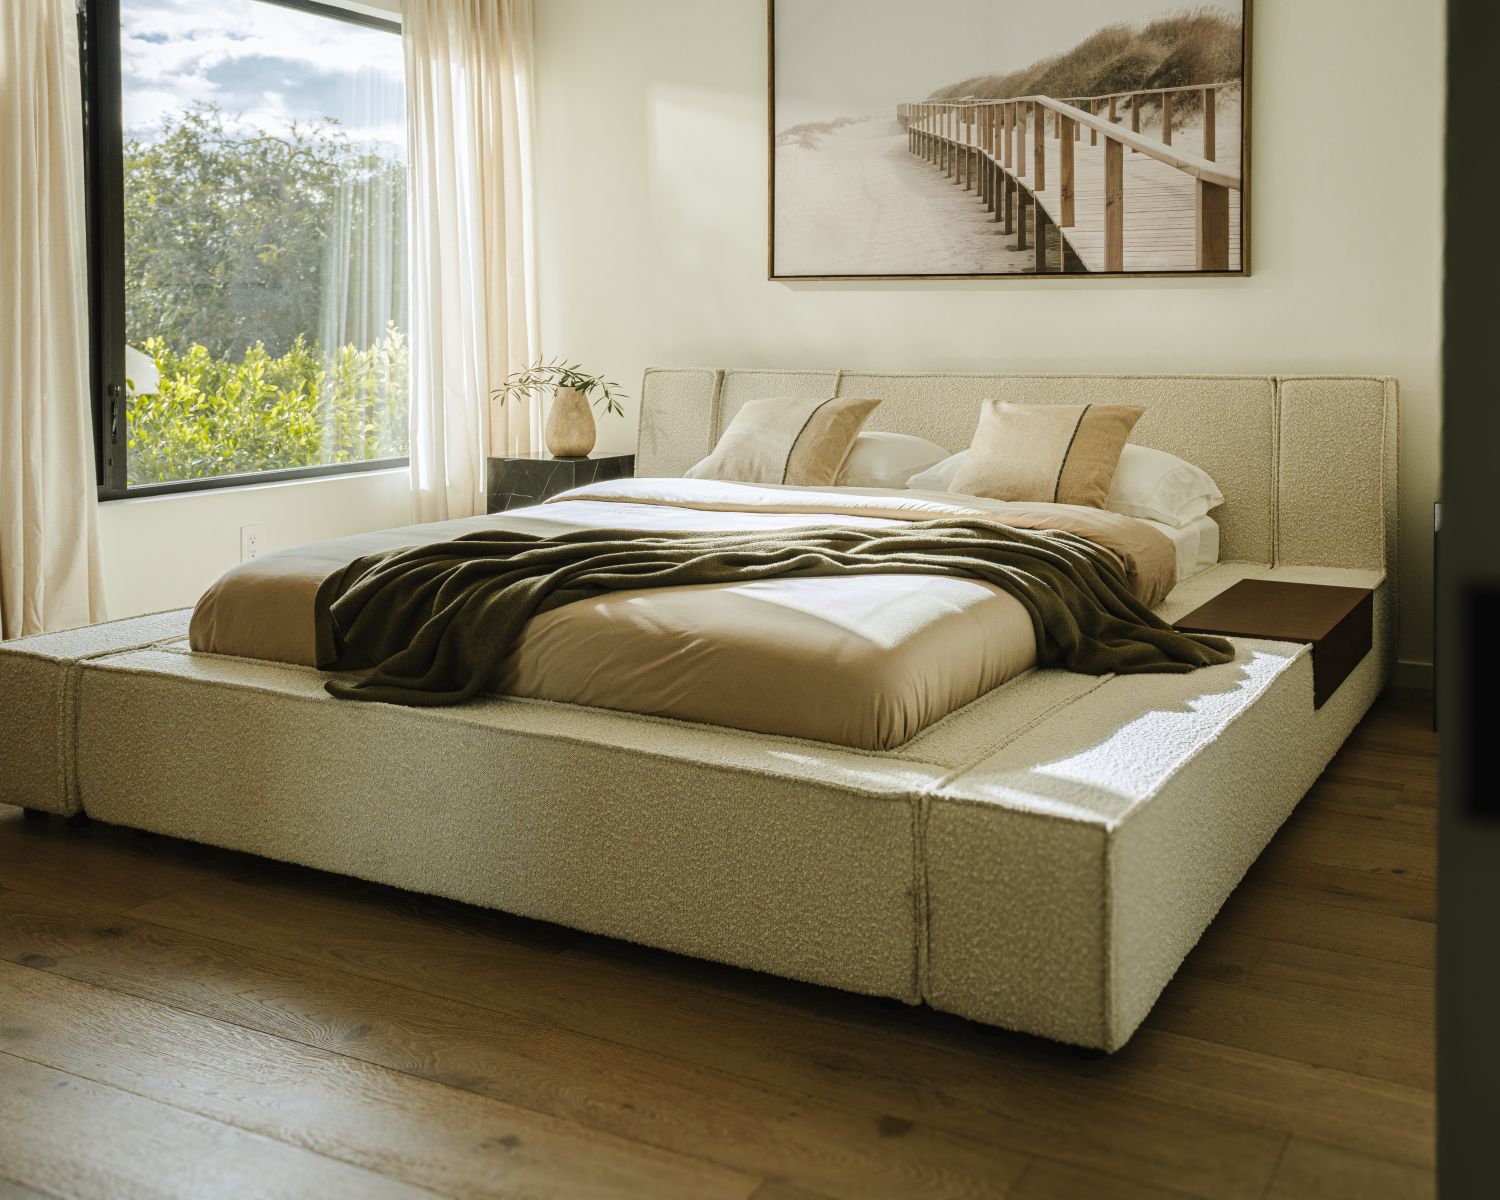 Where to Buy a Modern Bed Frame Online